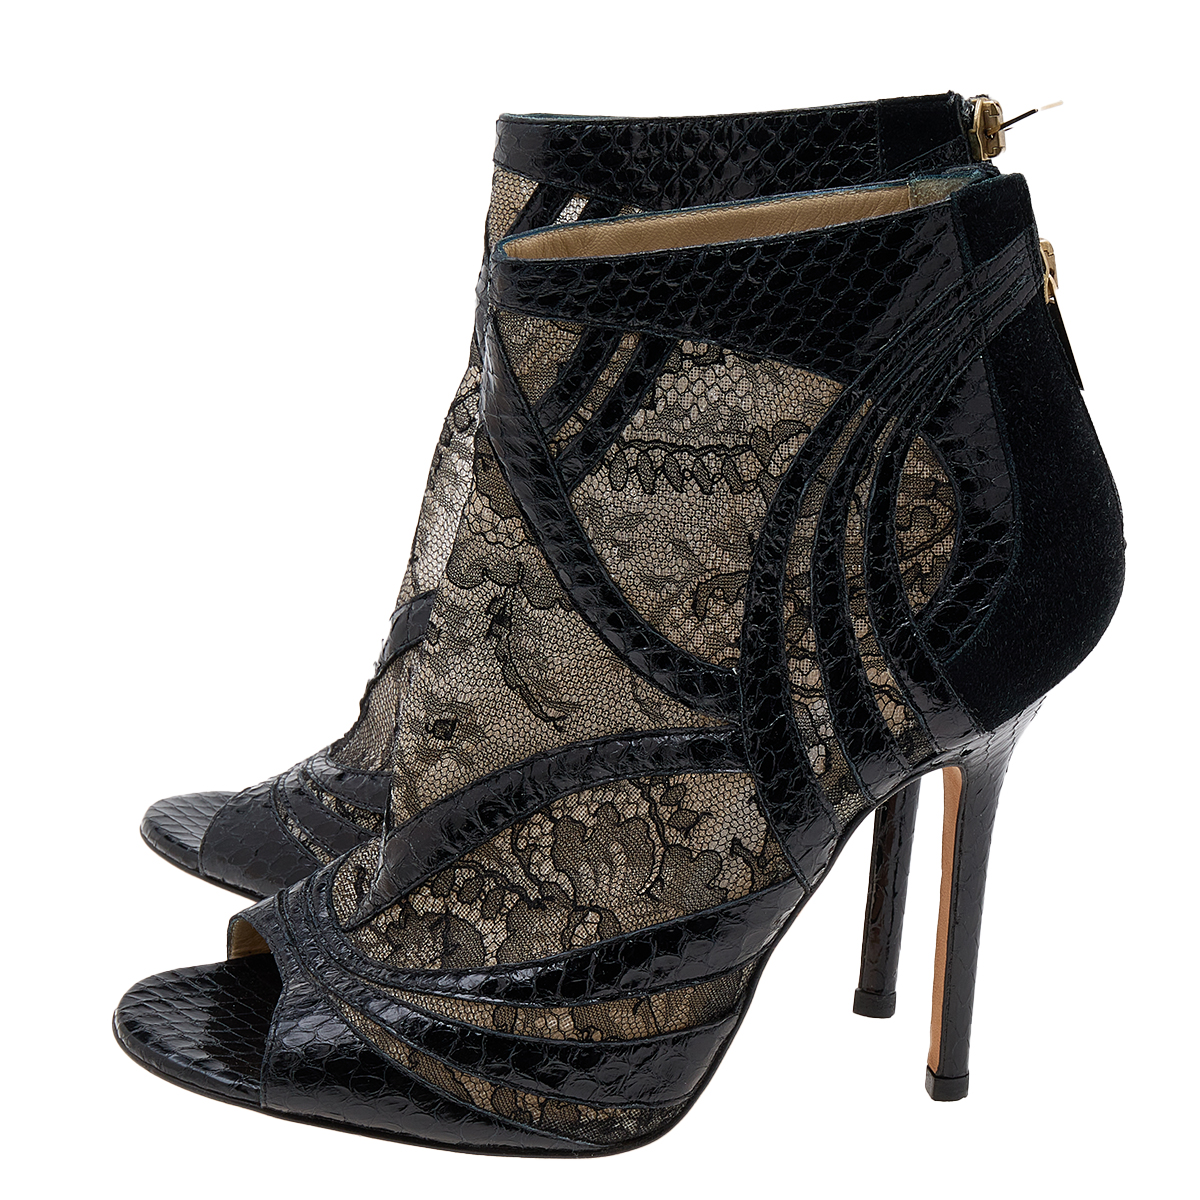 Jimmy Choo Black Snakeskin And Lace Peep Toe Booties Size 37.5